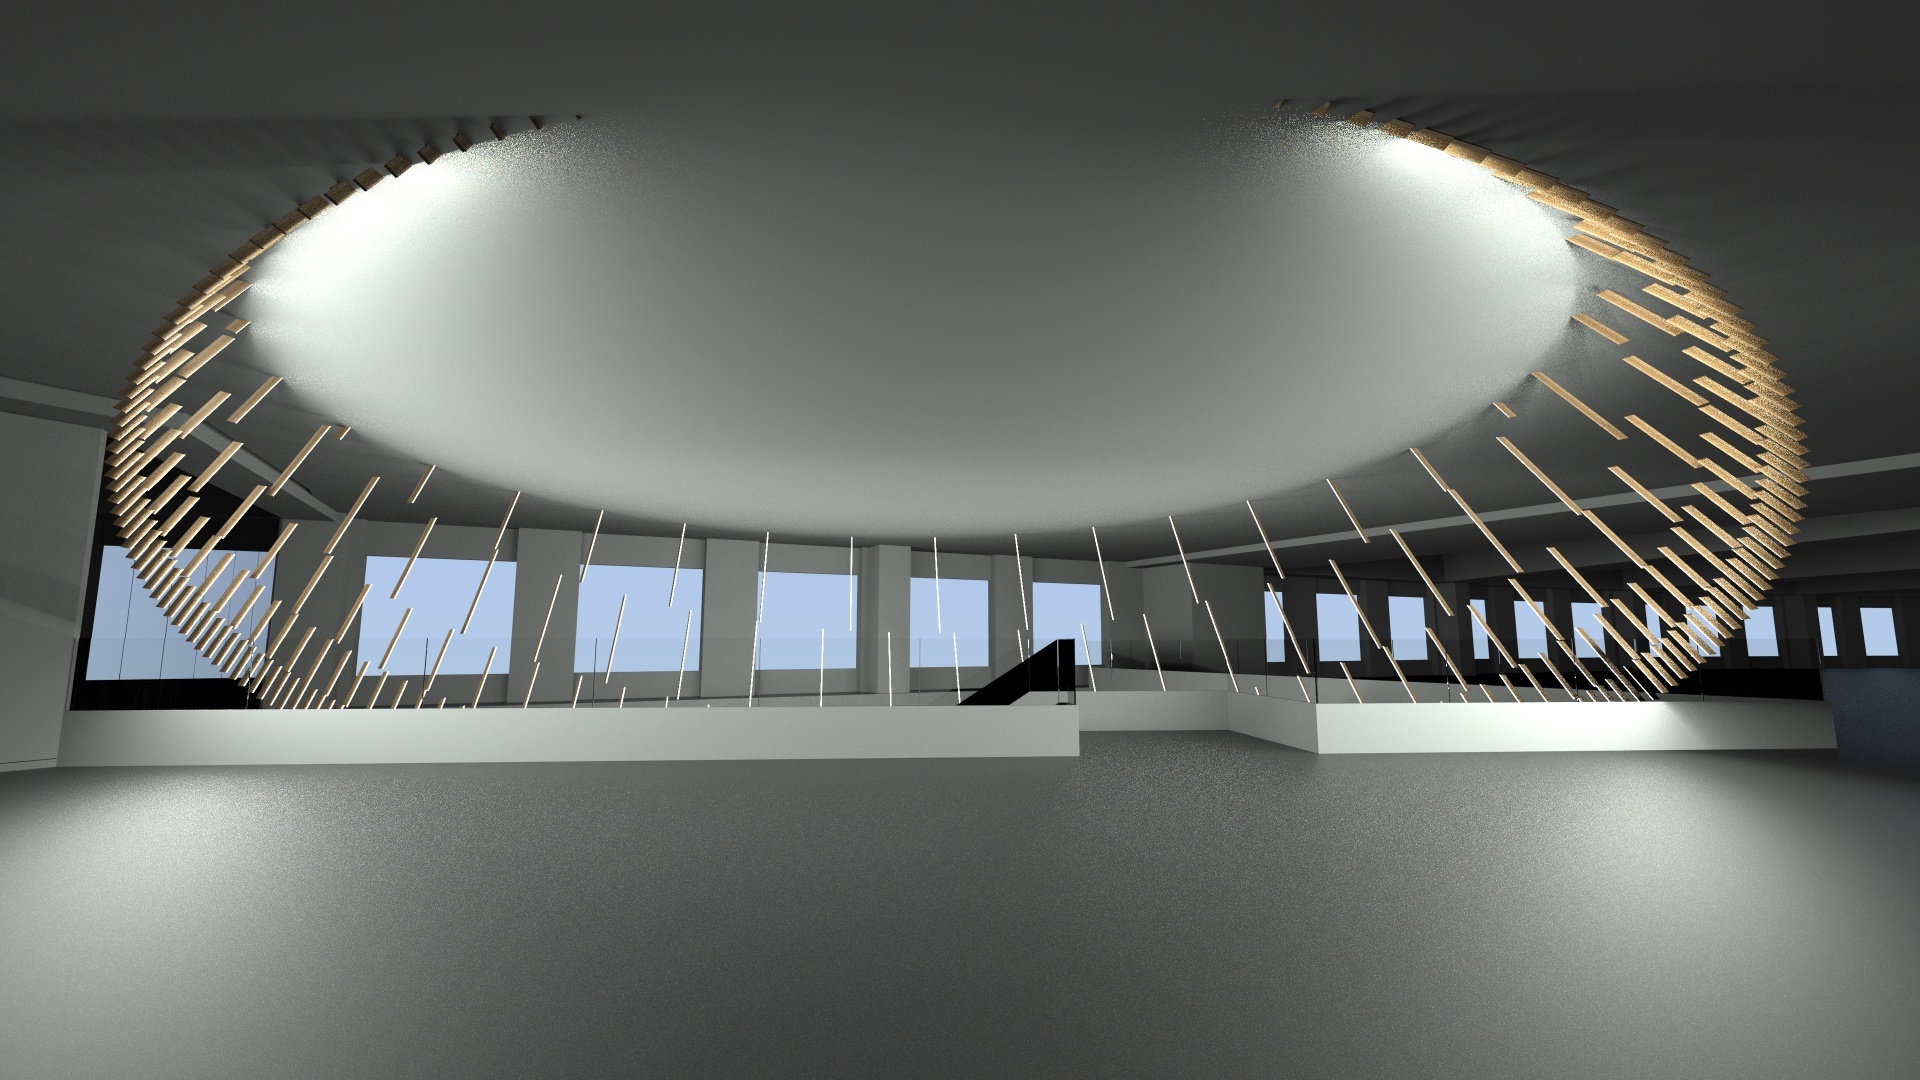 Render of final design with circular interactive sculptural installation suspended in the space above a stairwell